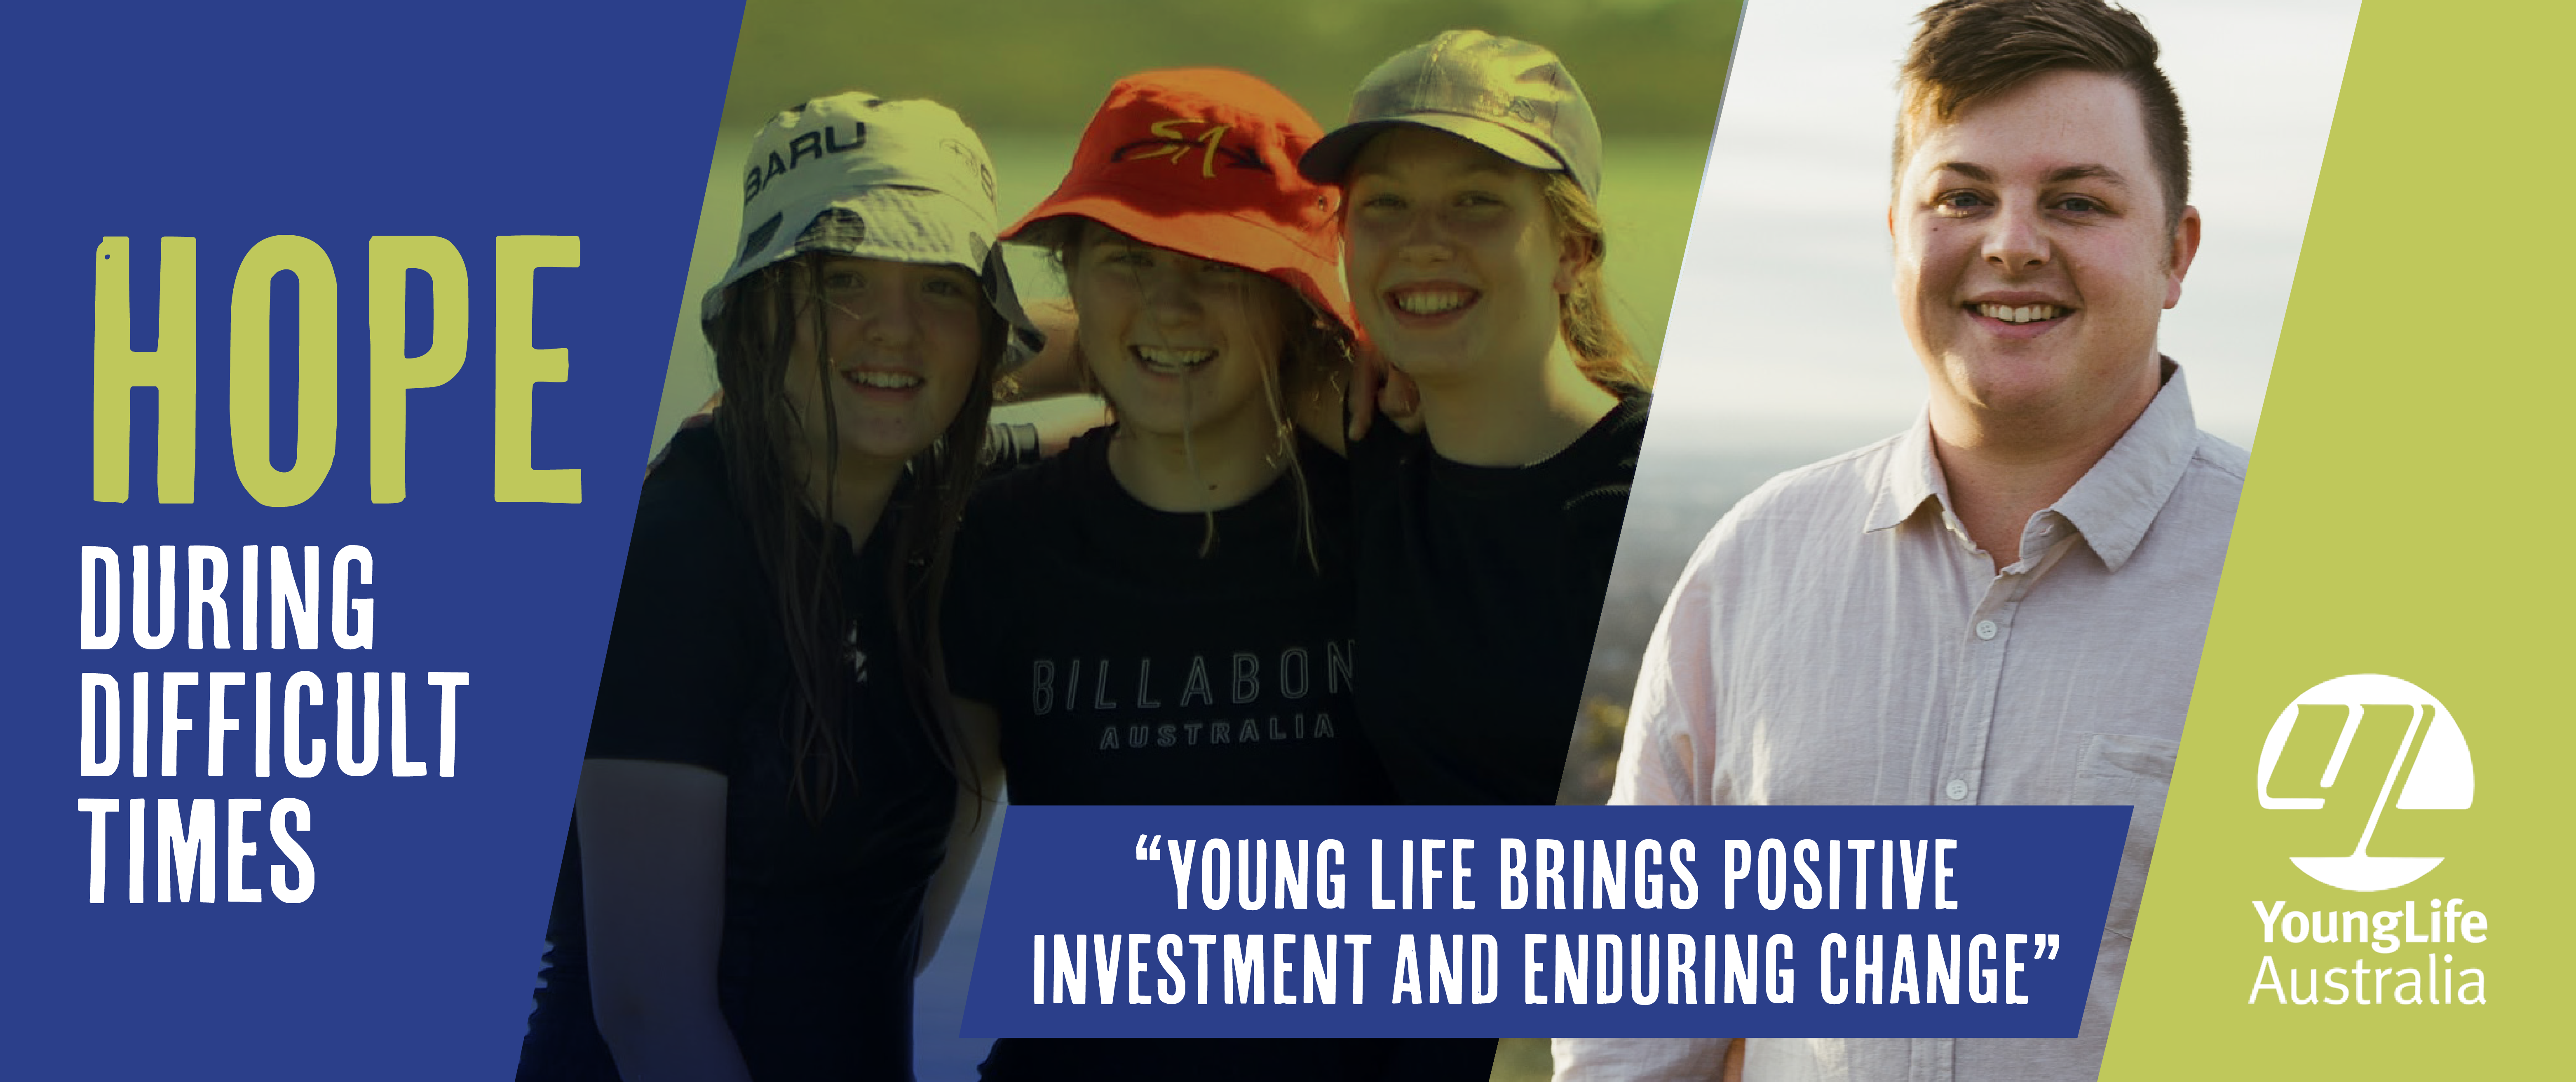 Young Life brings positive investment